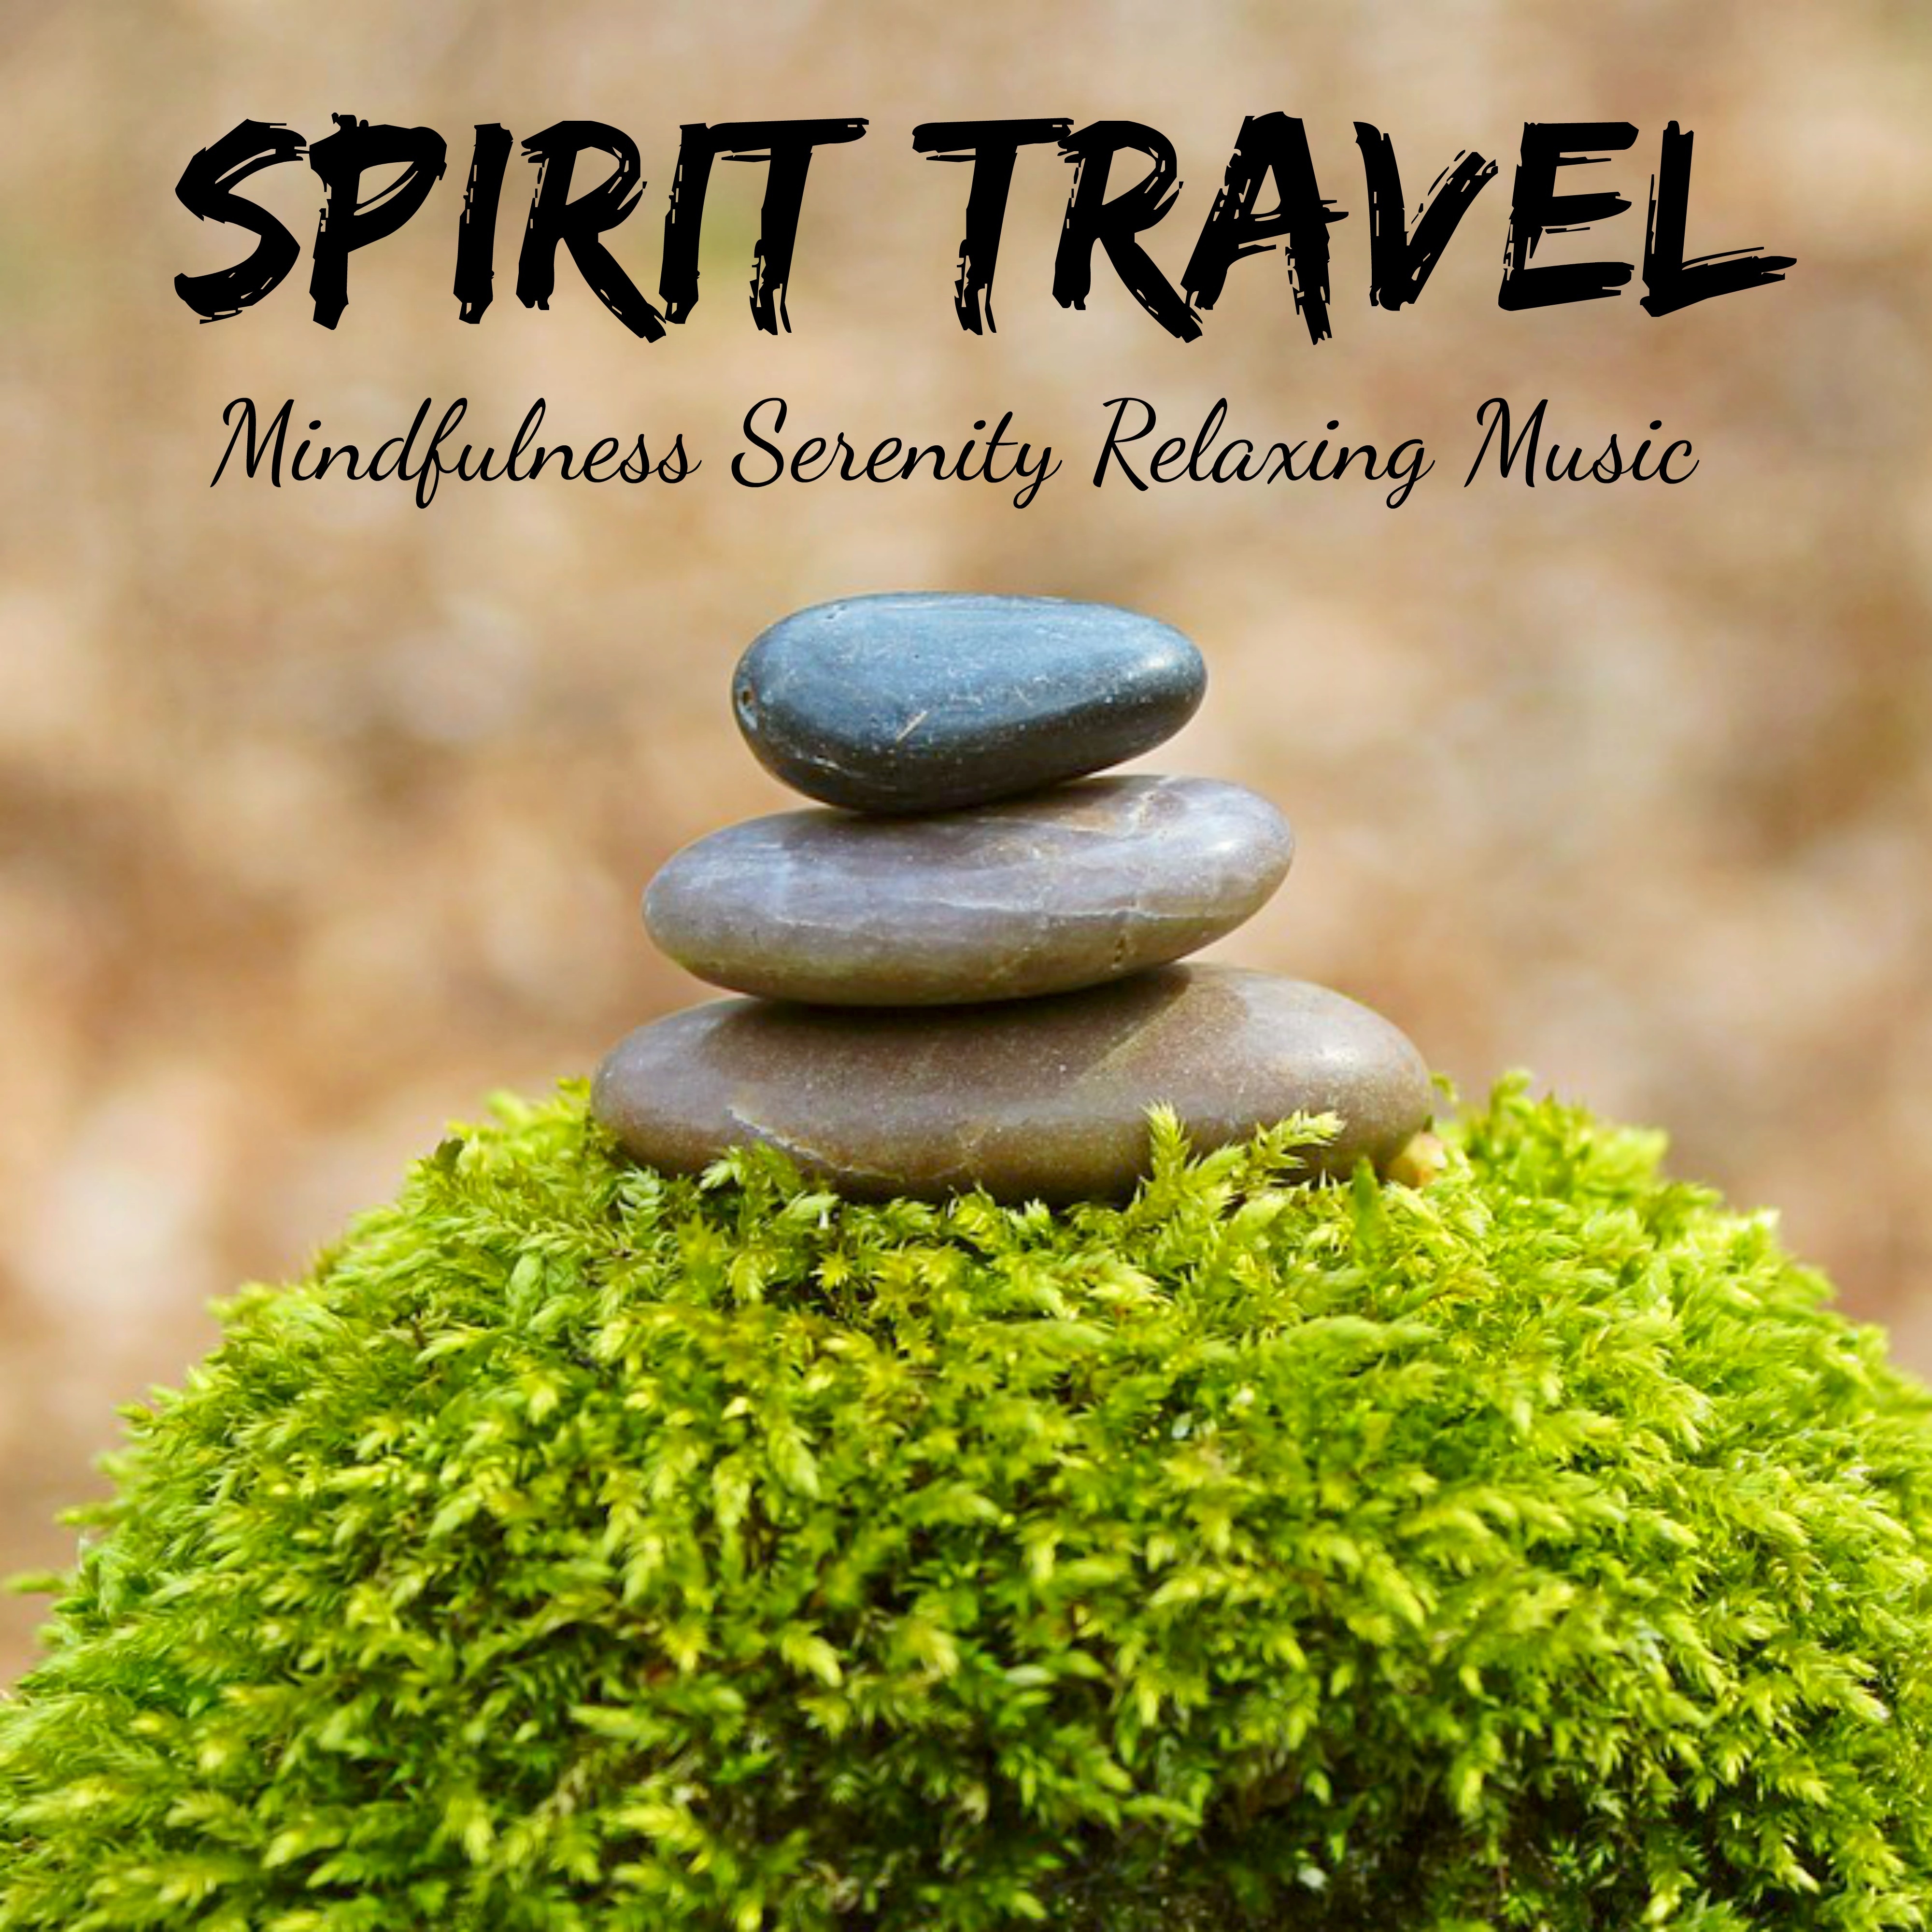 Spirit Travel - Mindfulness Serenity Relaxing Music for Reiki Treatment Natural Healing with Instrumental Nature New Age Sounds